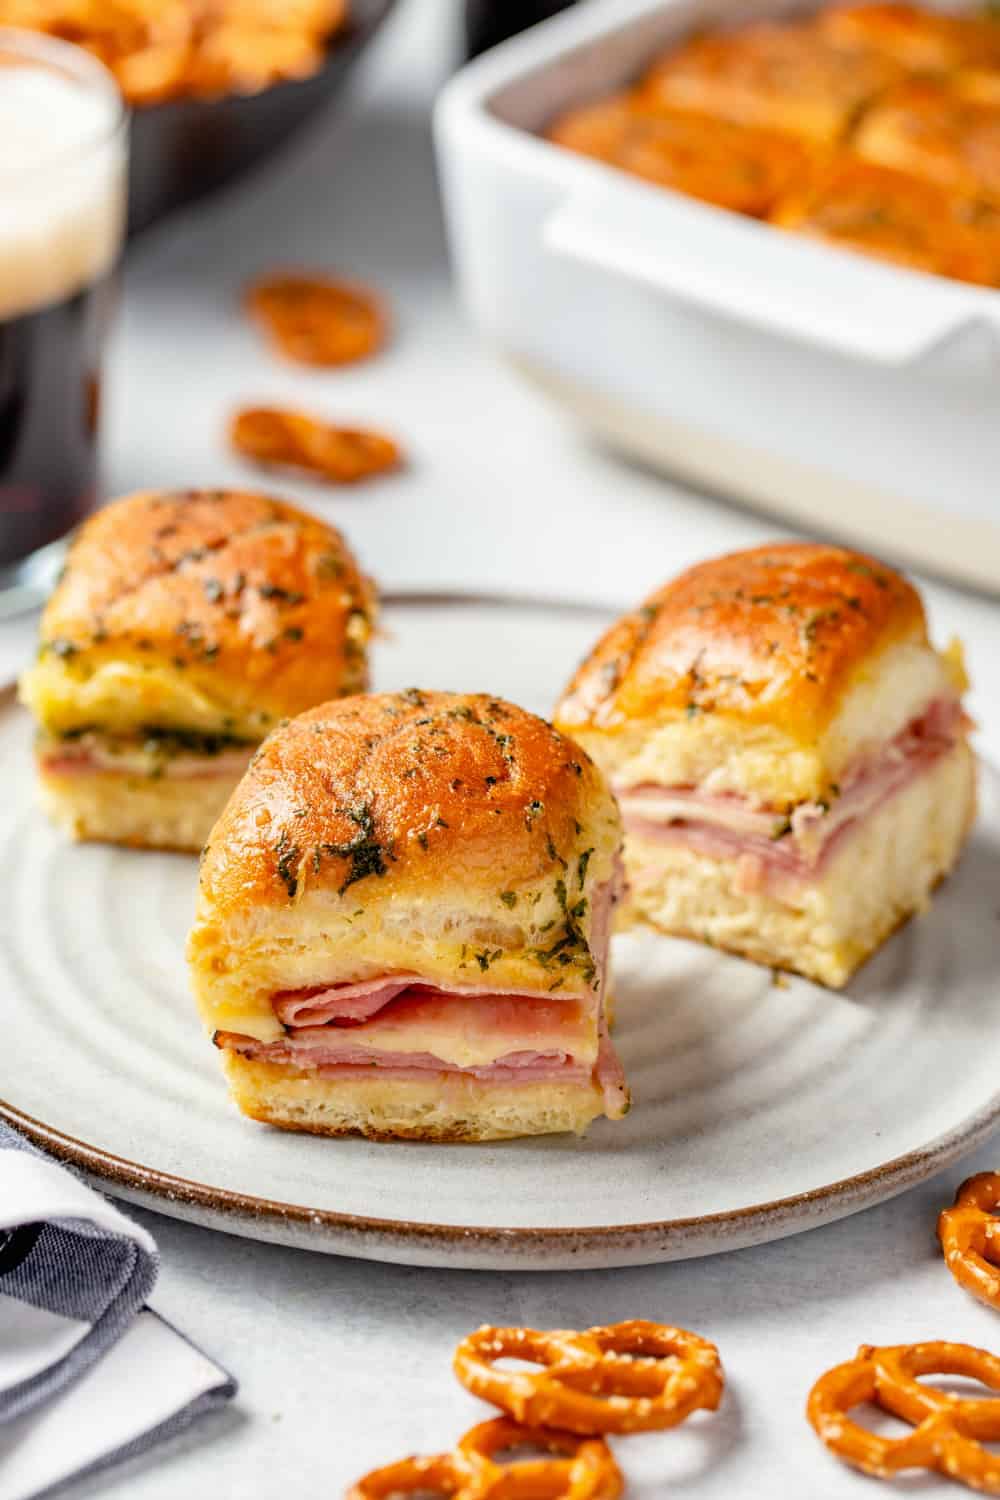 3 ham and cheese sliders on a white plate with a baking dish in the background